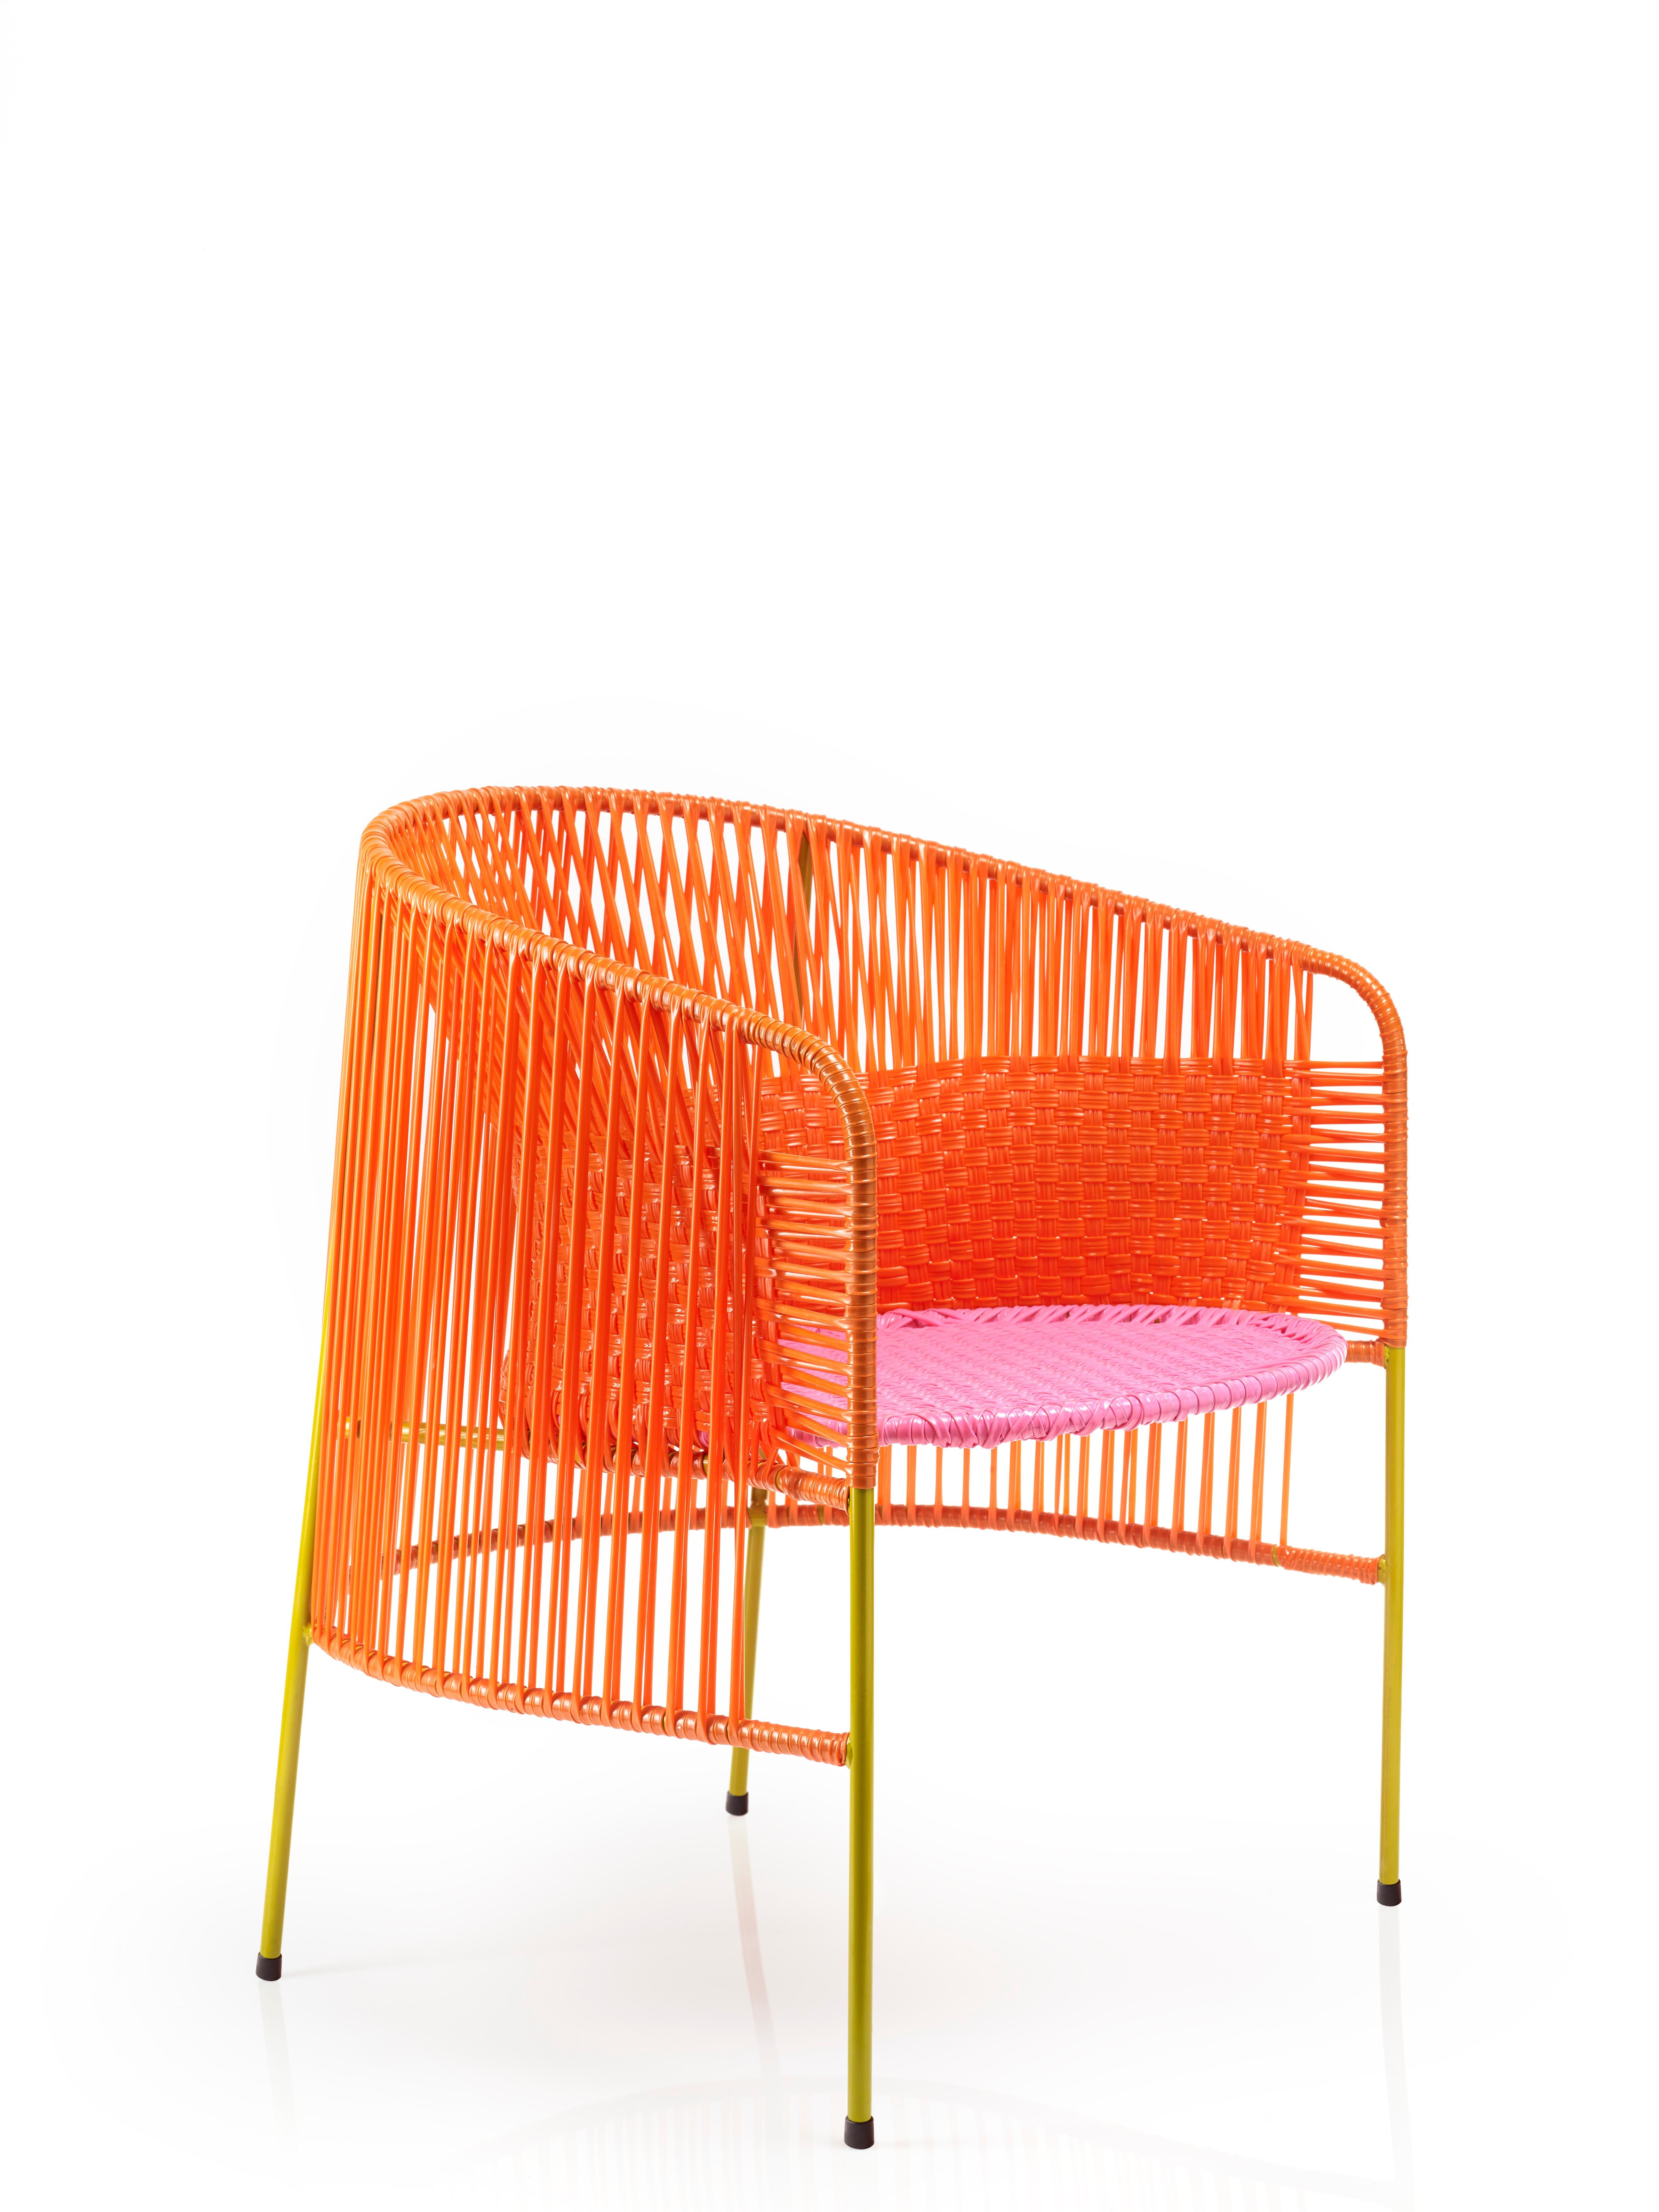 Orange Rose Caribe lounge chair by Sebastian Herkner
Materials: Galvanized and powder-coated tubular steel. PVC strings are made from recycled plastic.
Technique: Made from recycled plastic and weaved by local craftspeople in Colombia.